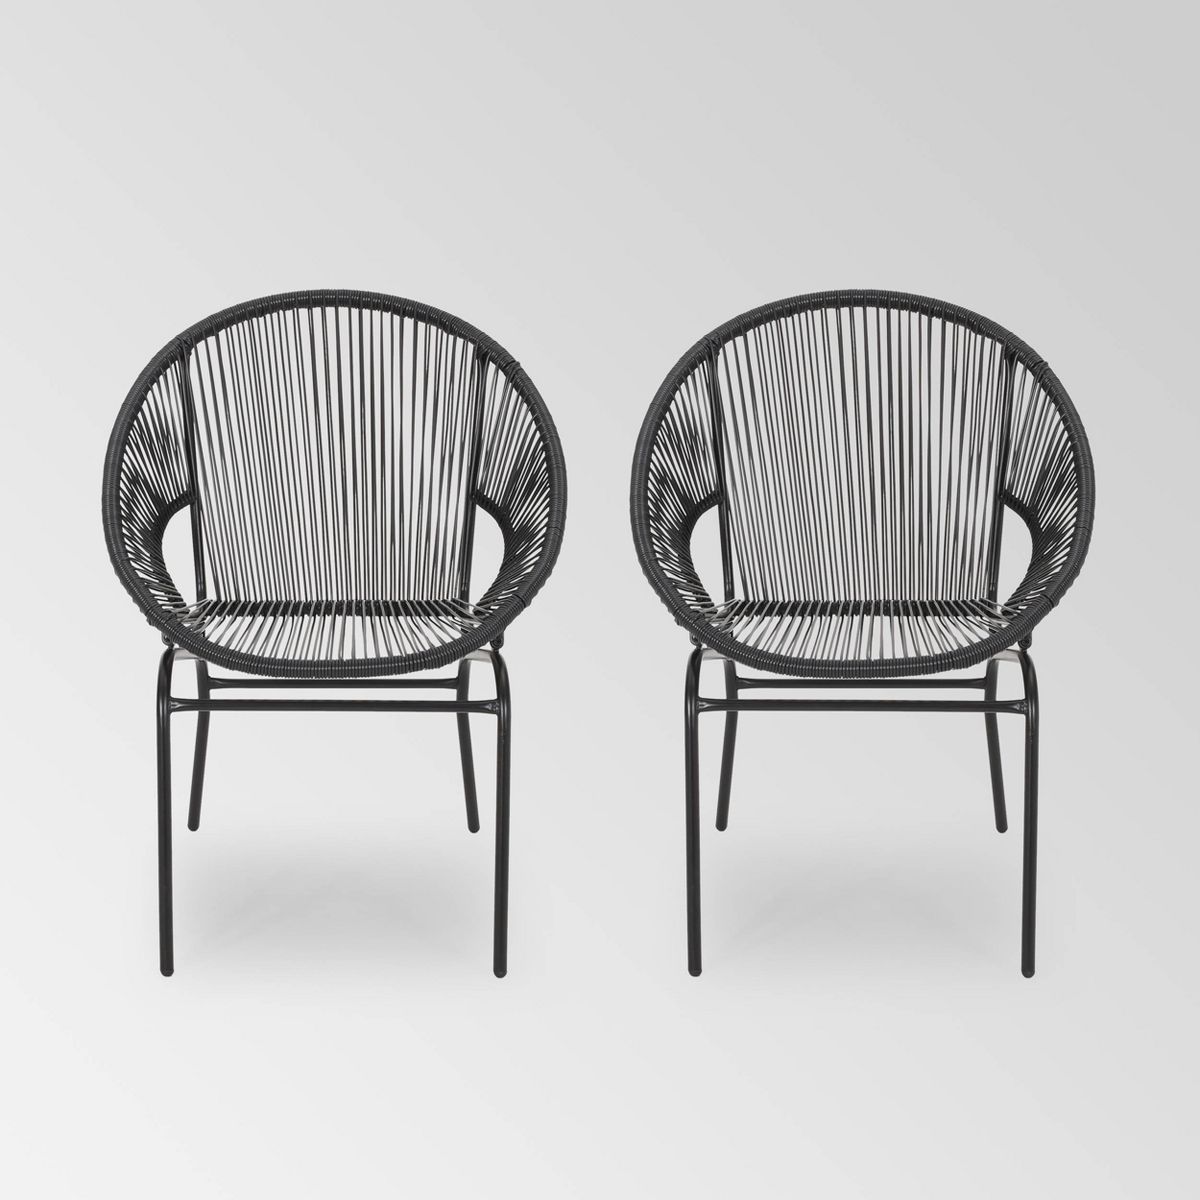 Nusa 2pk Faux Rattan Patio Club Chairs - Christopher Knight Home | Target